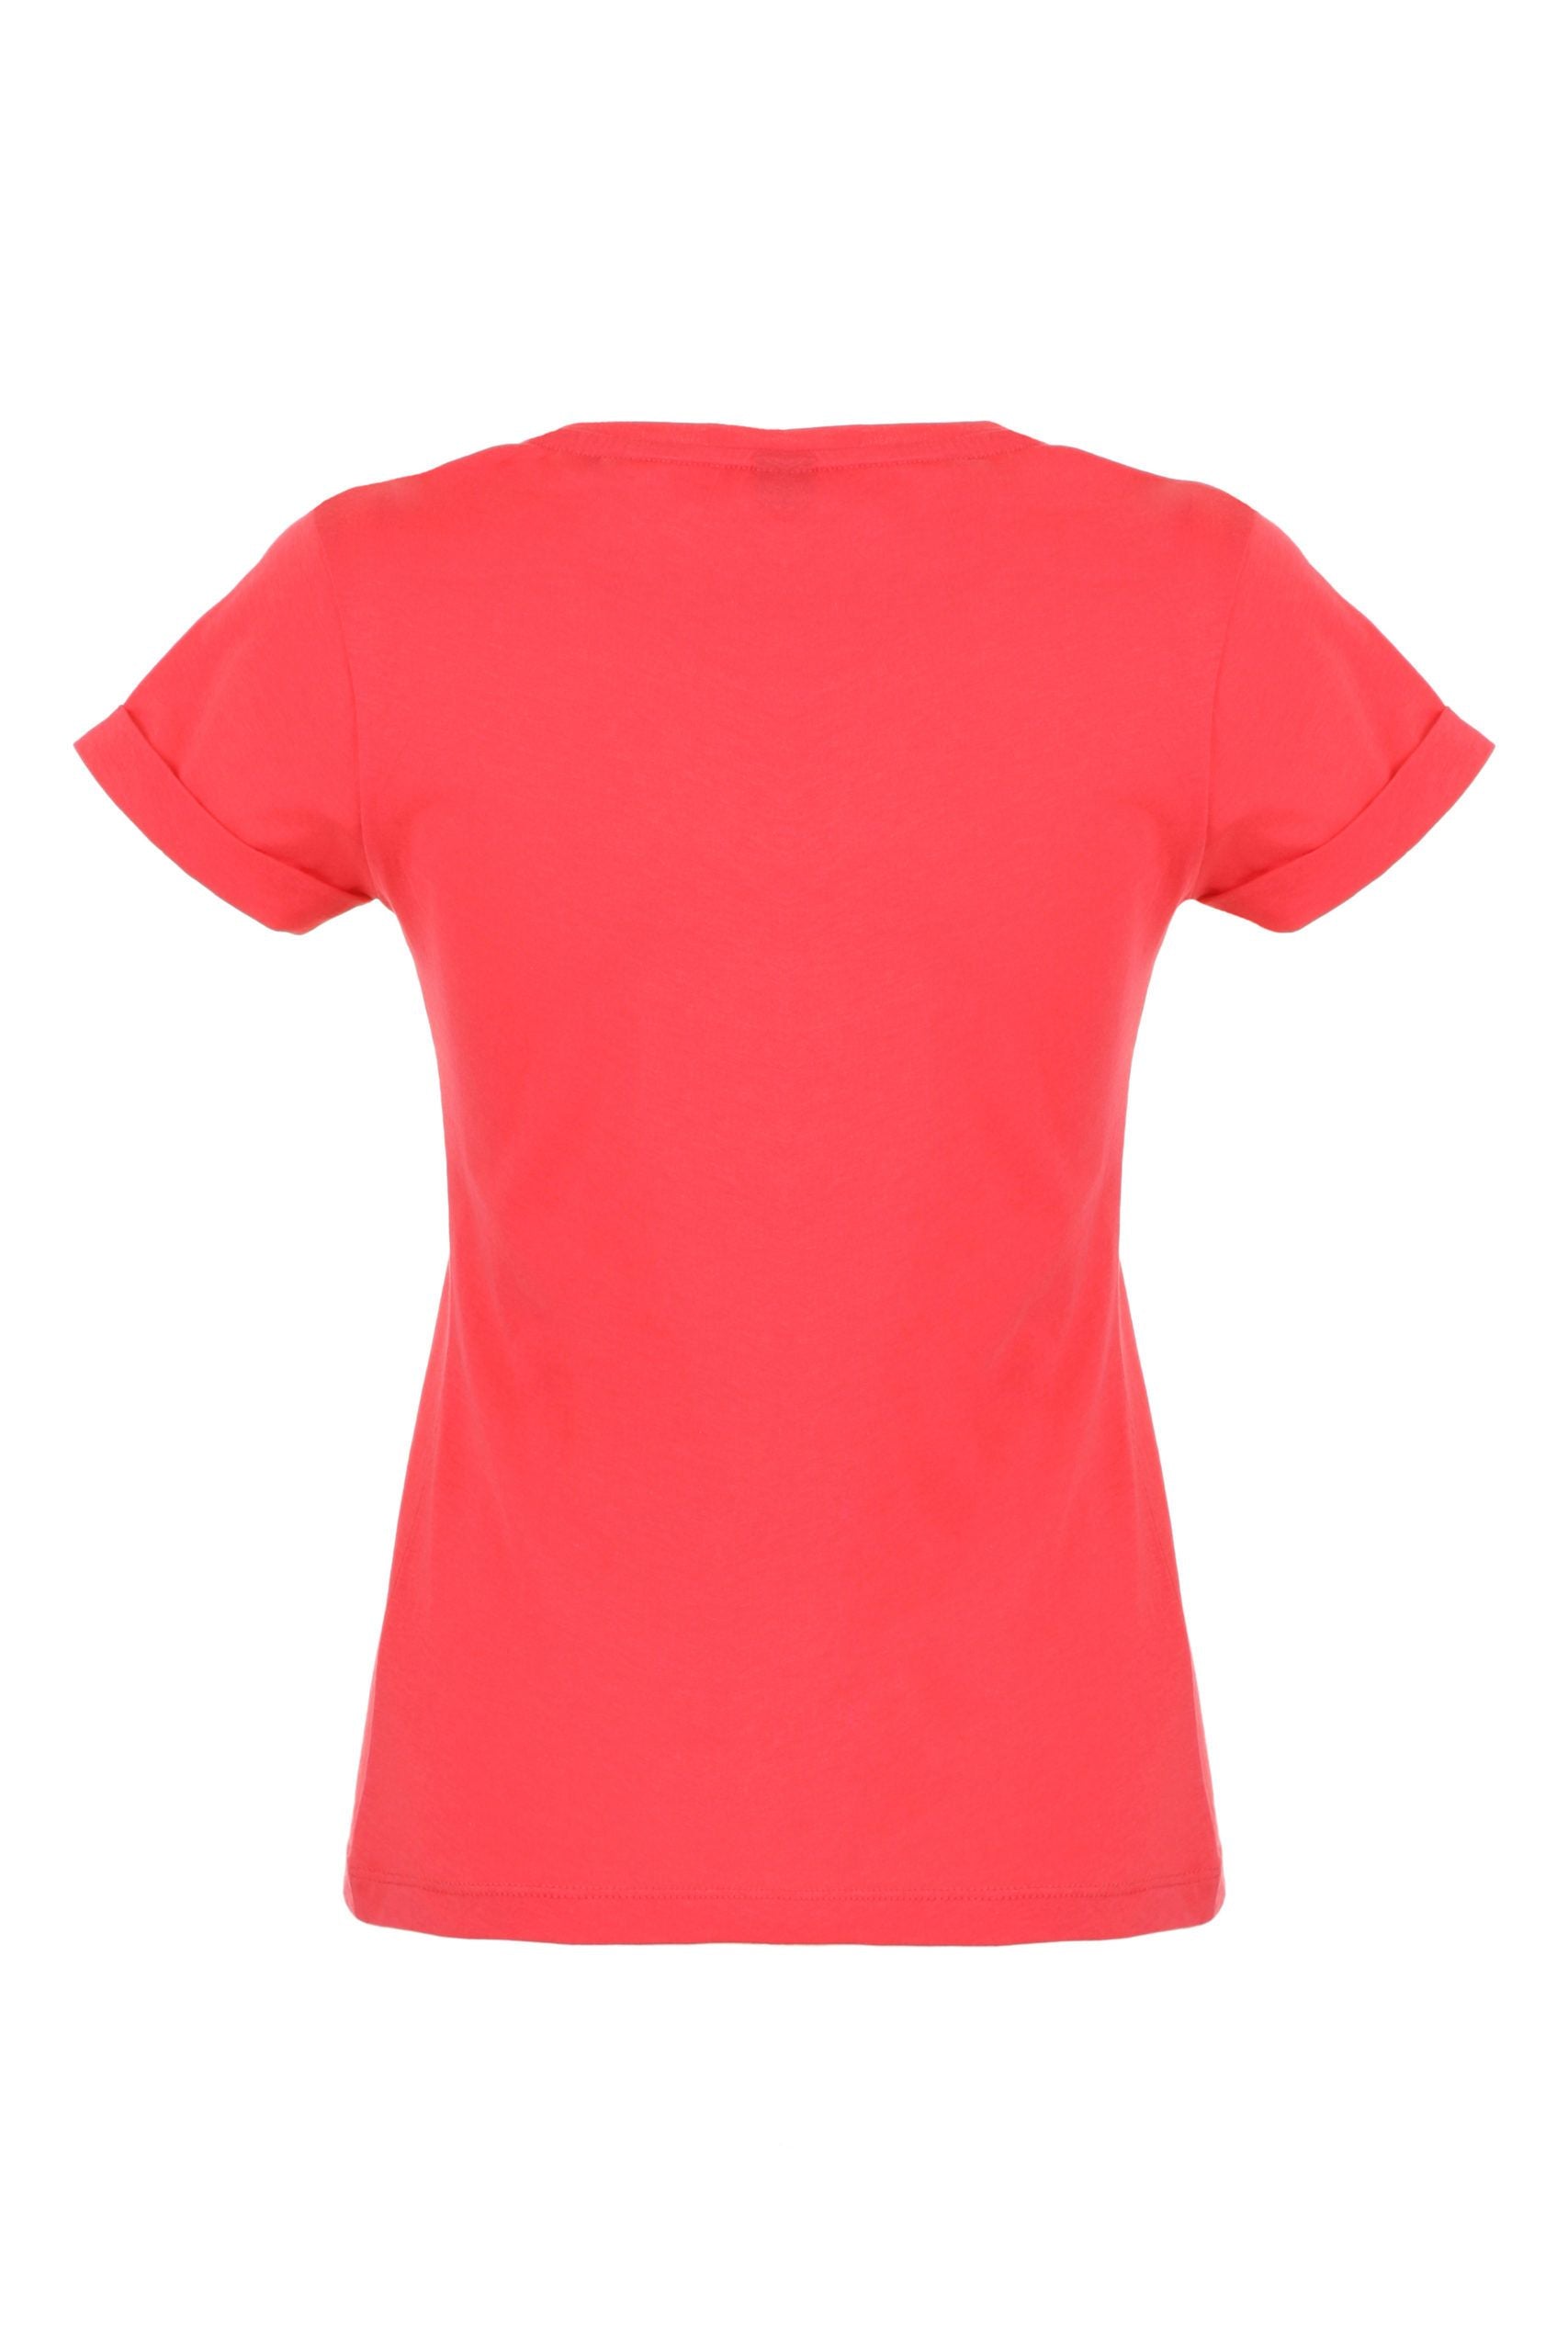 Imperfect Chic Pink Cotton Logo Tee for Women